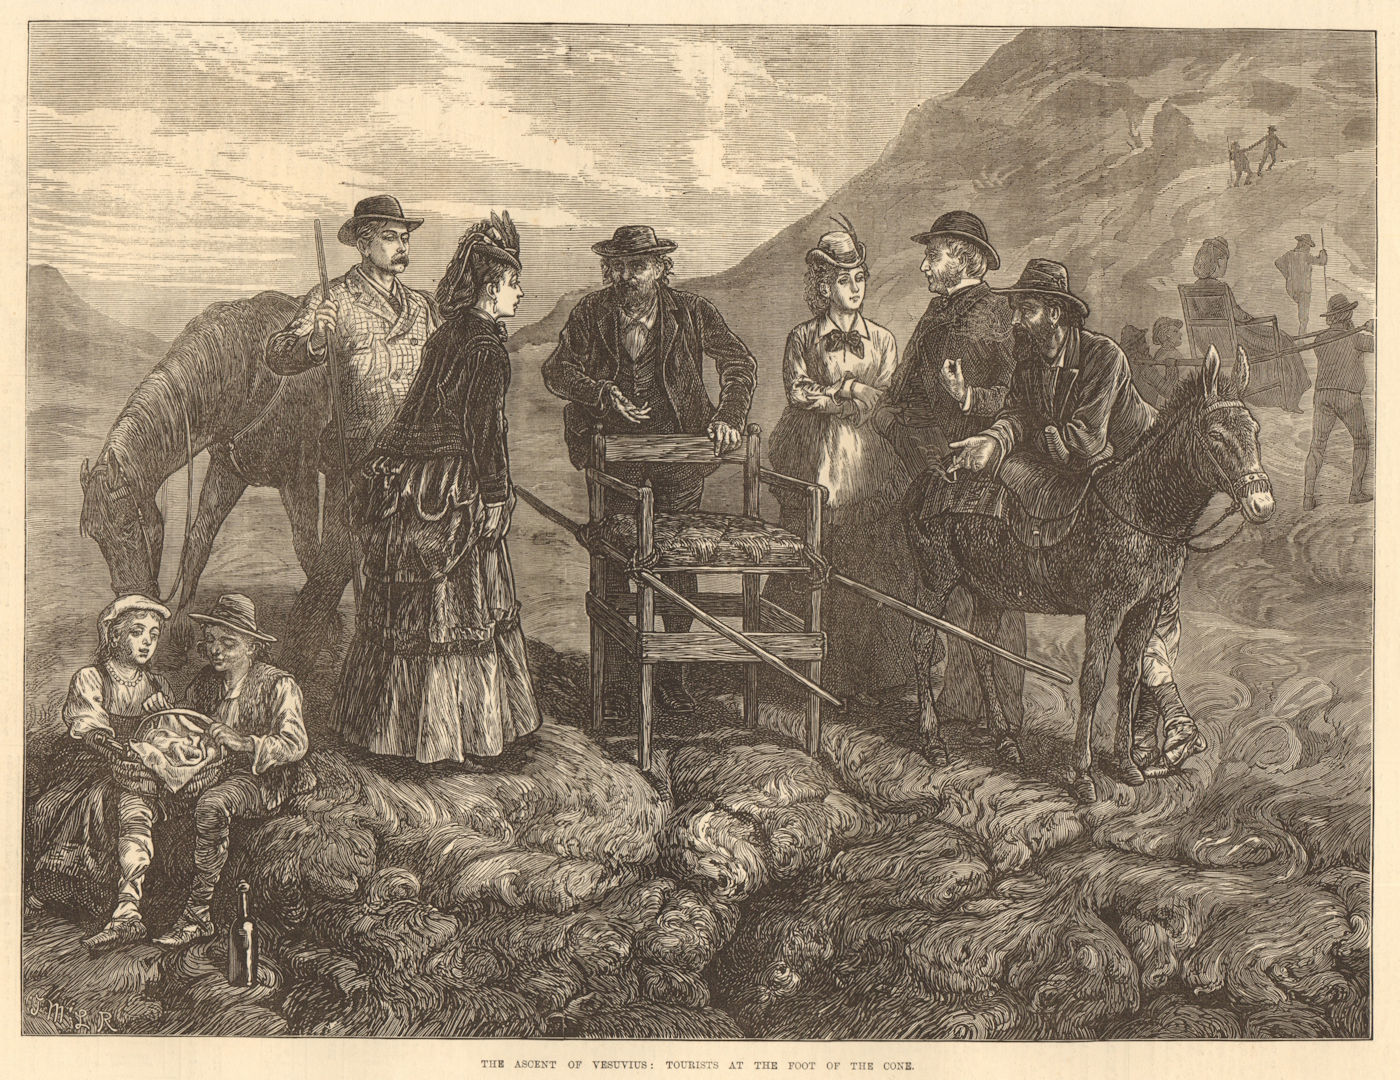 Associate Product The ascent of Vesuvius: tourists at the foot of the cone. Italy. Volcanoes 1872